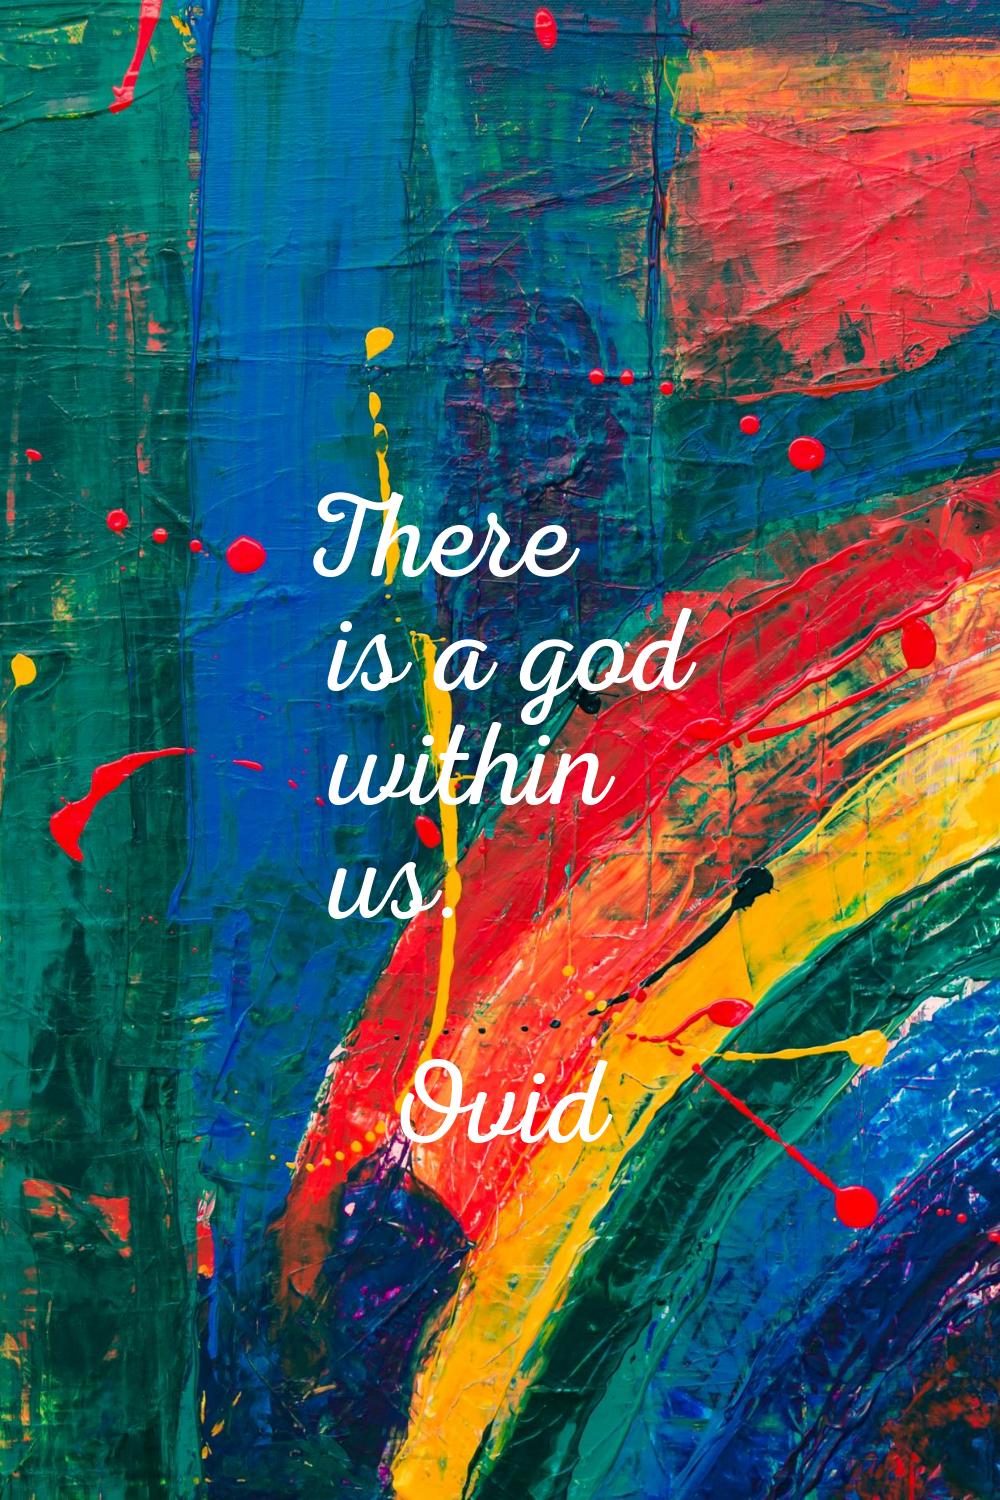 There is a god within us.